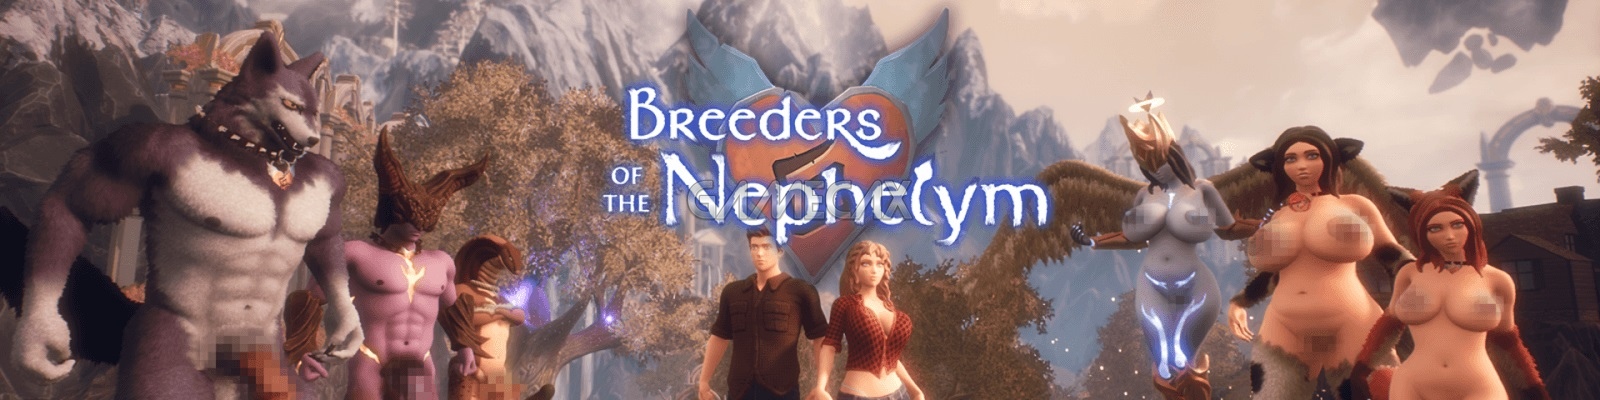 danny kwong recommends Breeders Of The Nephilim Porn